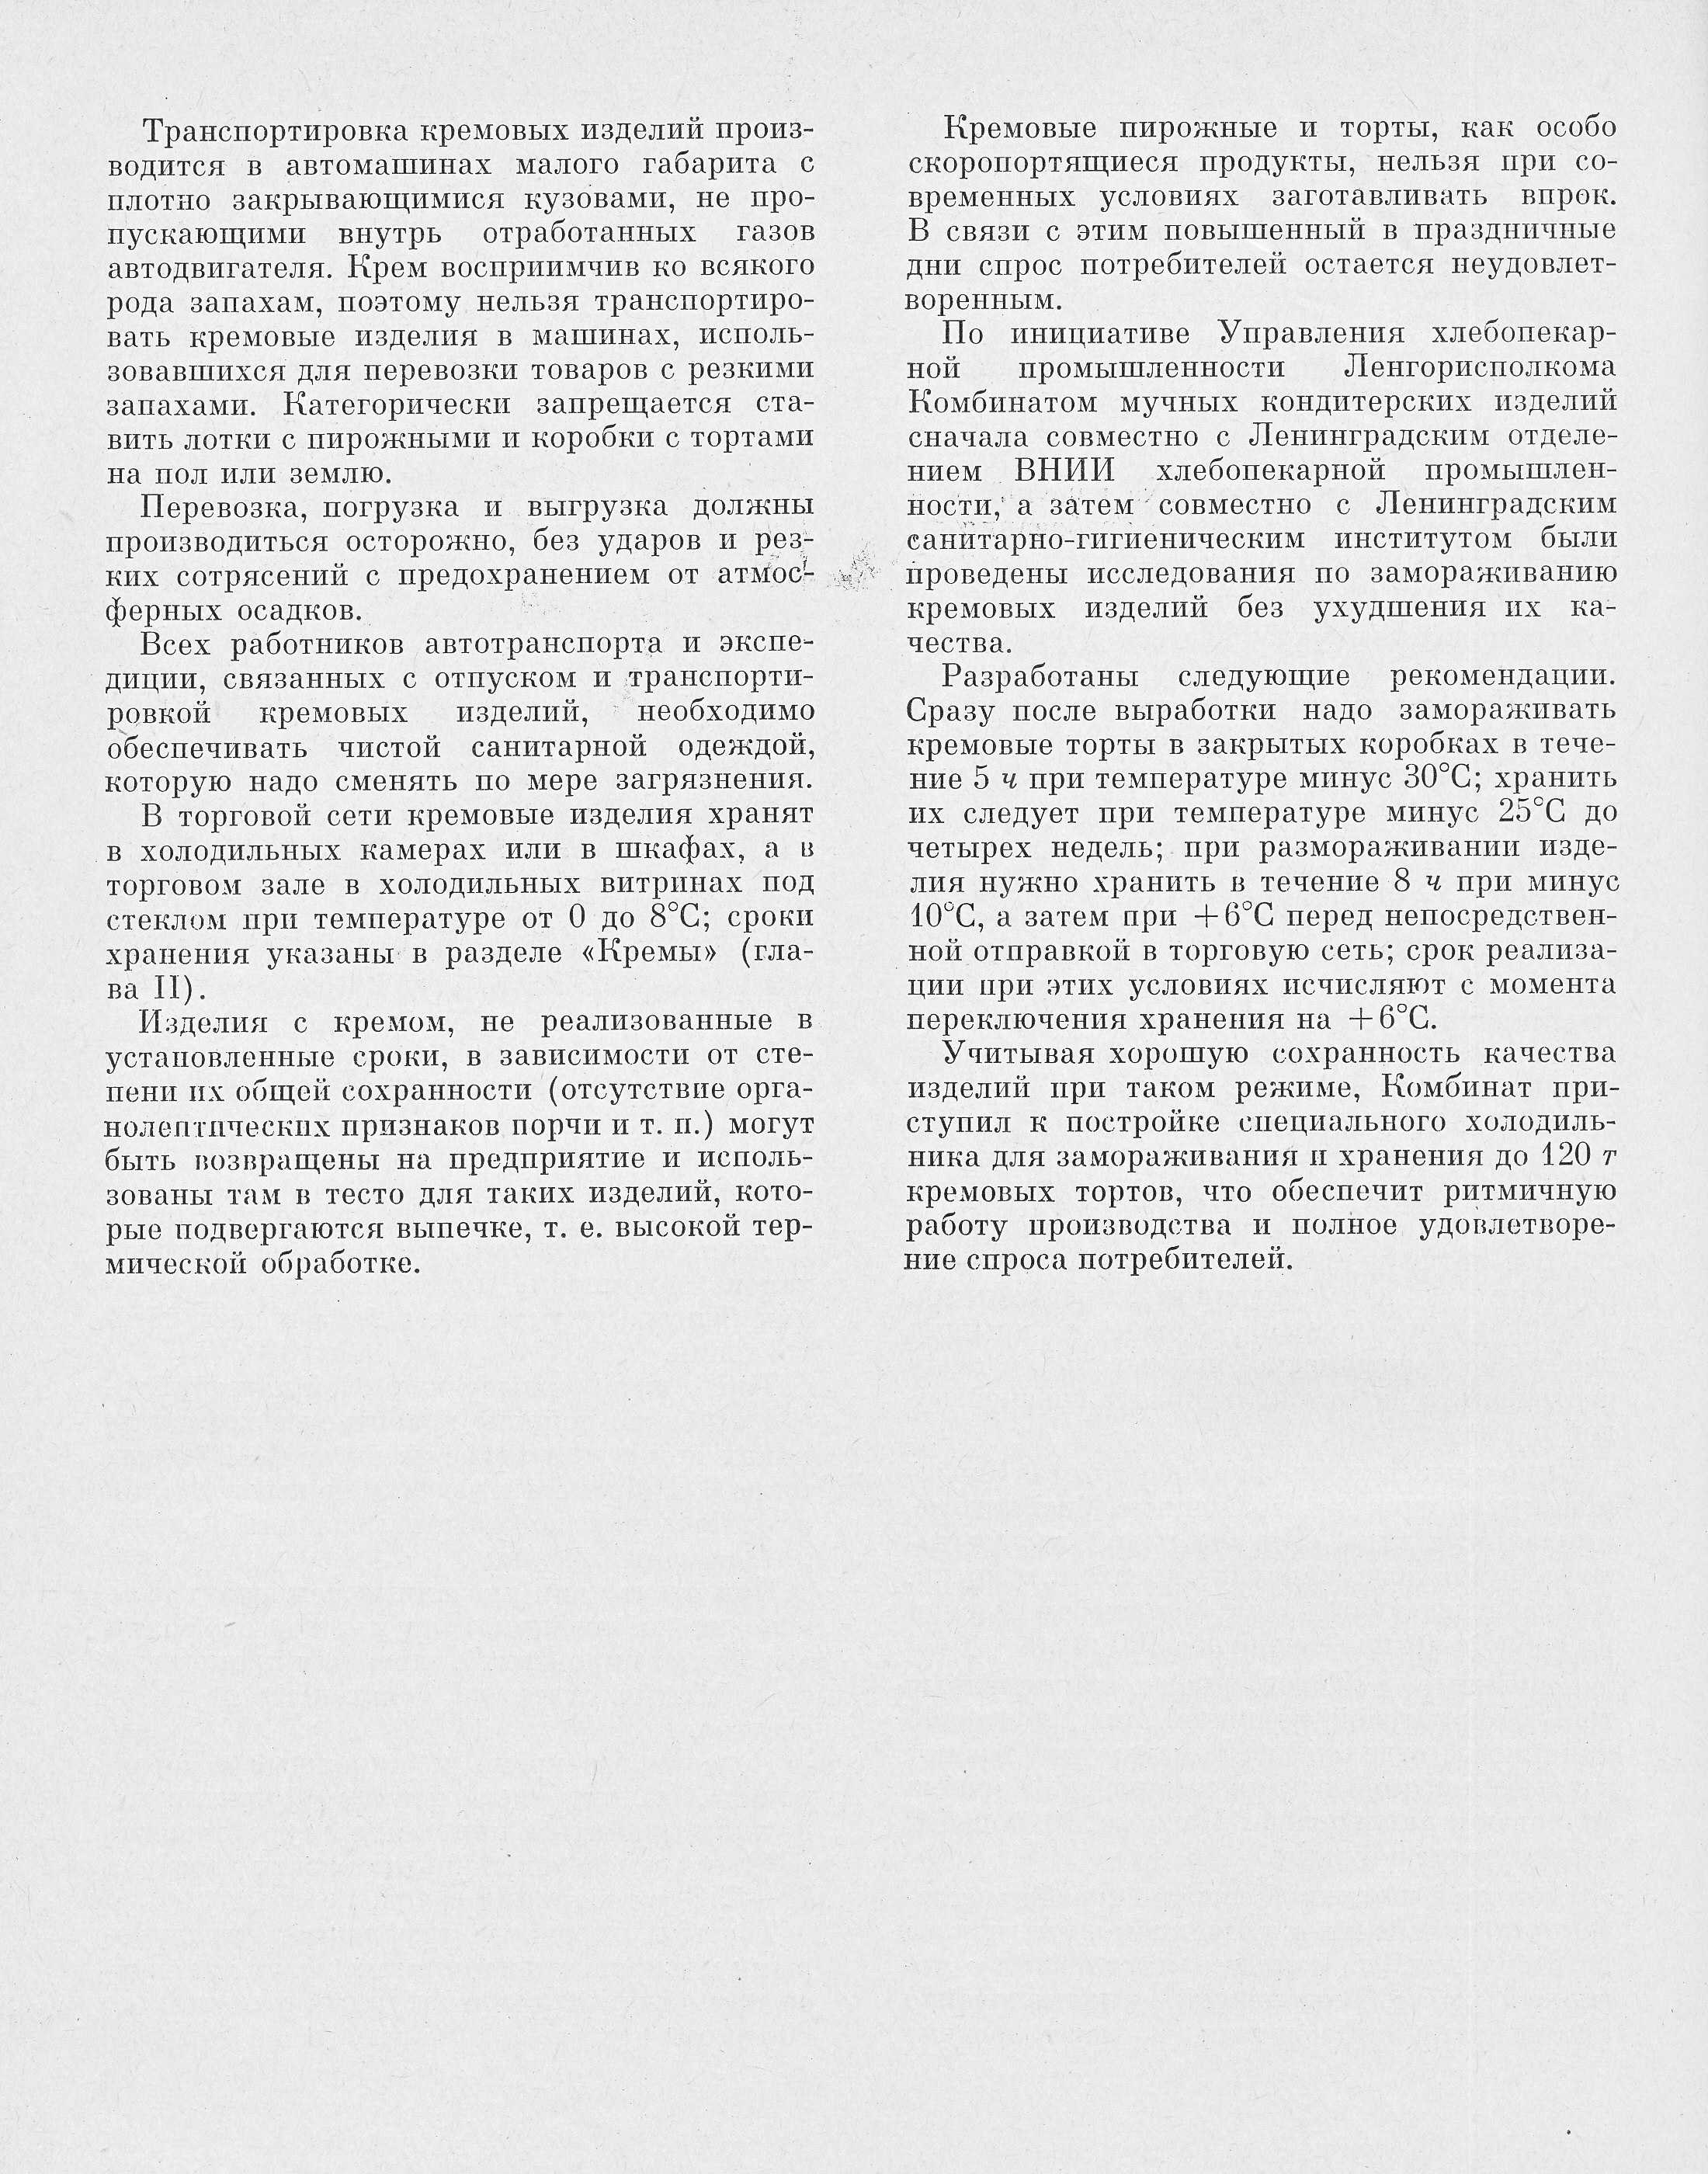 Production of pastries and cakes P.S. Markhel, Yu.L. Gopenshtein, S.V. Smelov 1974  page 284